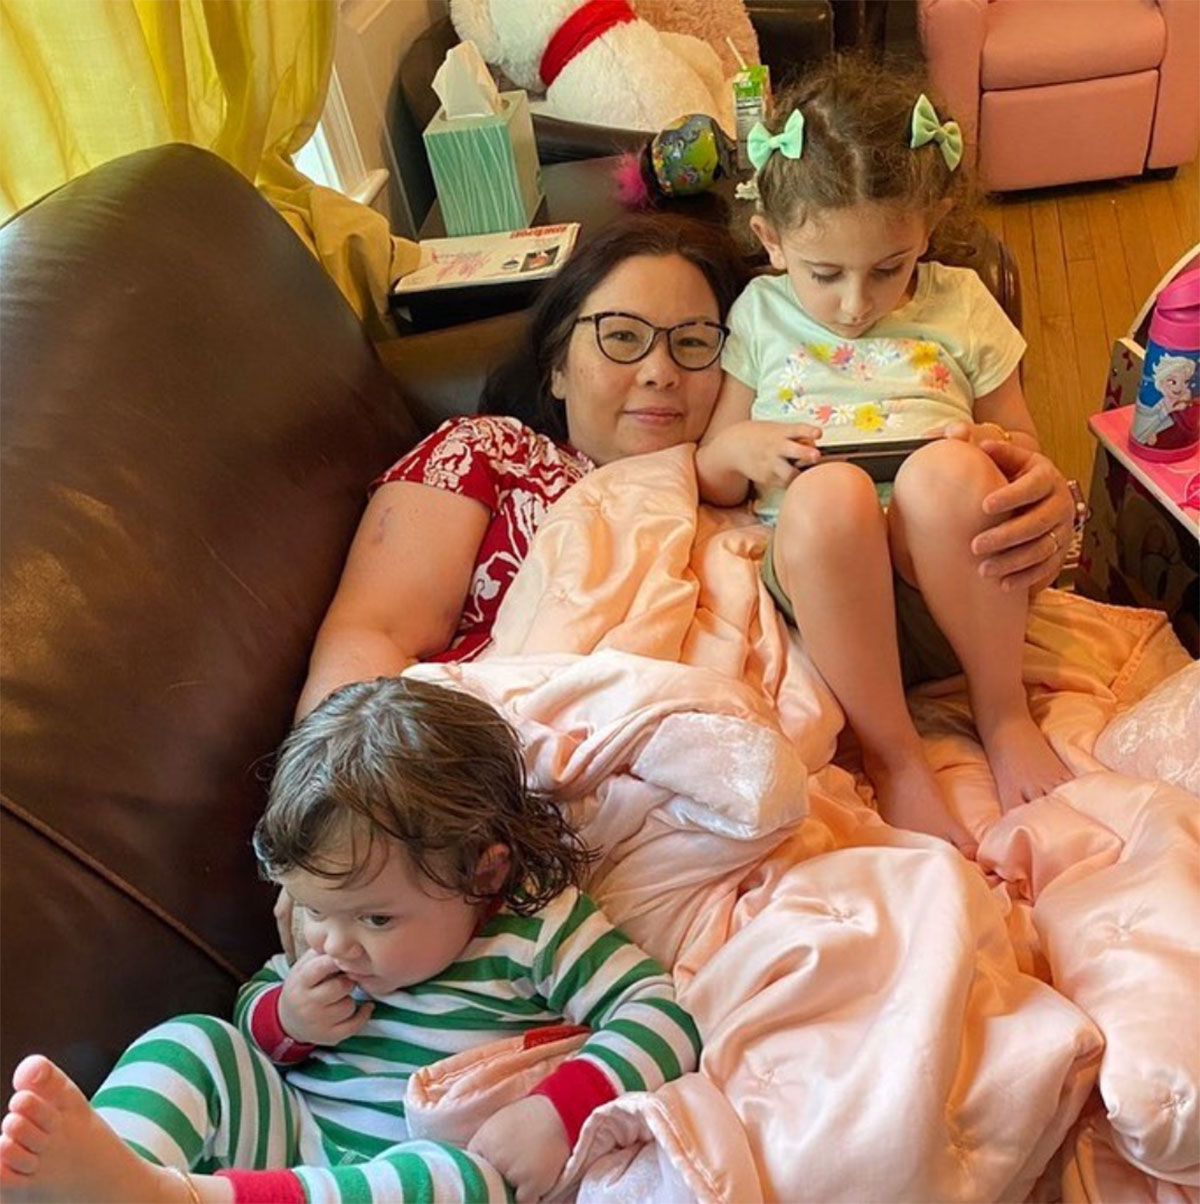 Senator Duckworth posted this picture on her Instagram feed with the caption, "Payoff for all the homeschooling, trying to work from home w/screaming babies &amp; general chaos of quarantine". (Courtesy of Senator Tammy Duckworth)